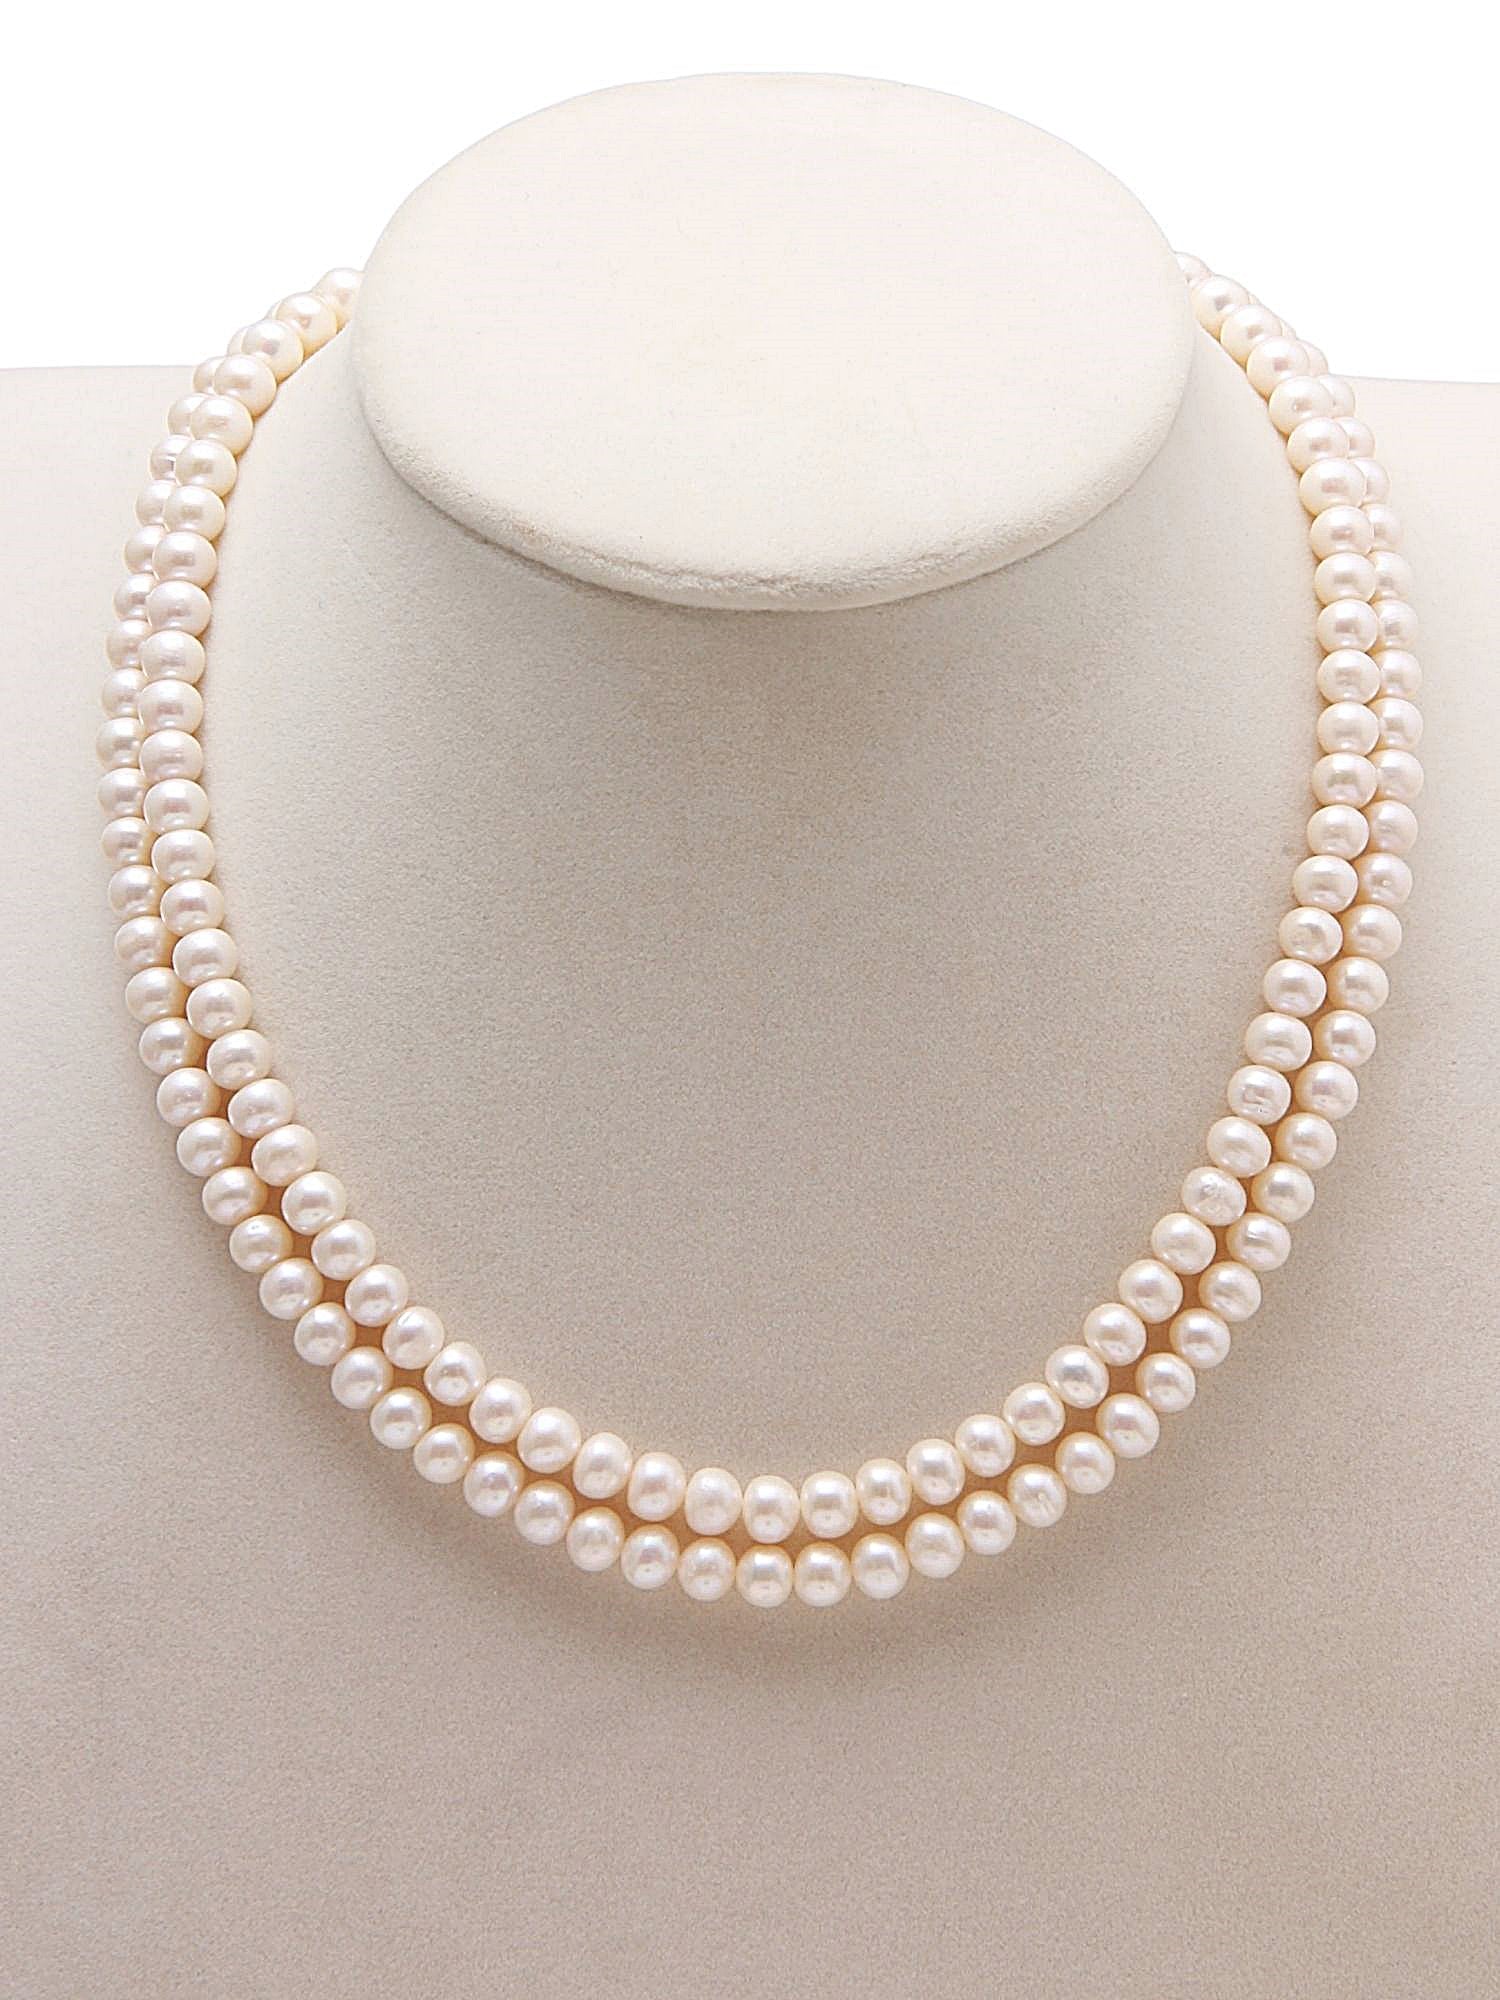 High Luster White Freshwater Pearls 2-Layered Necklace with 92.5 Sterling Silver Clasp, 290 Carats -(F1021)